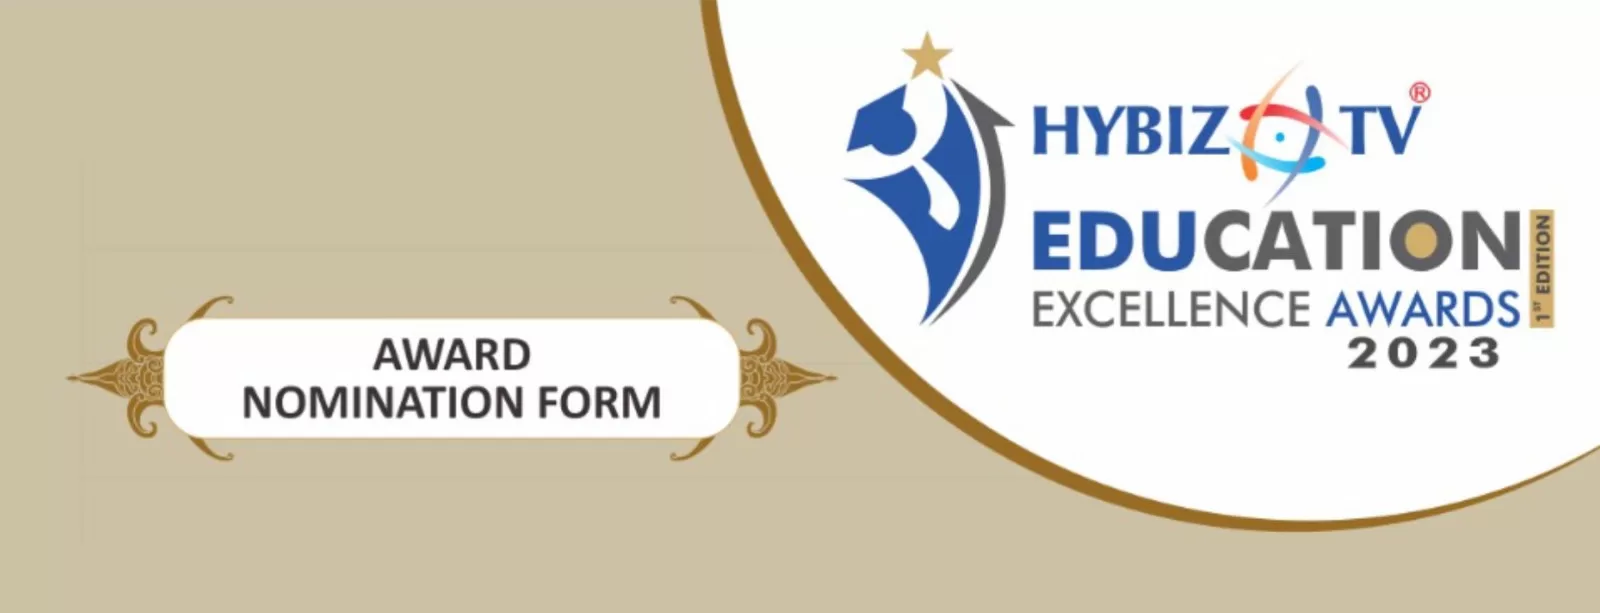 Education Excellence Awards 2023